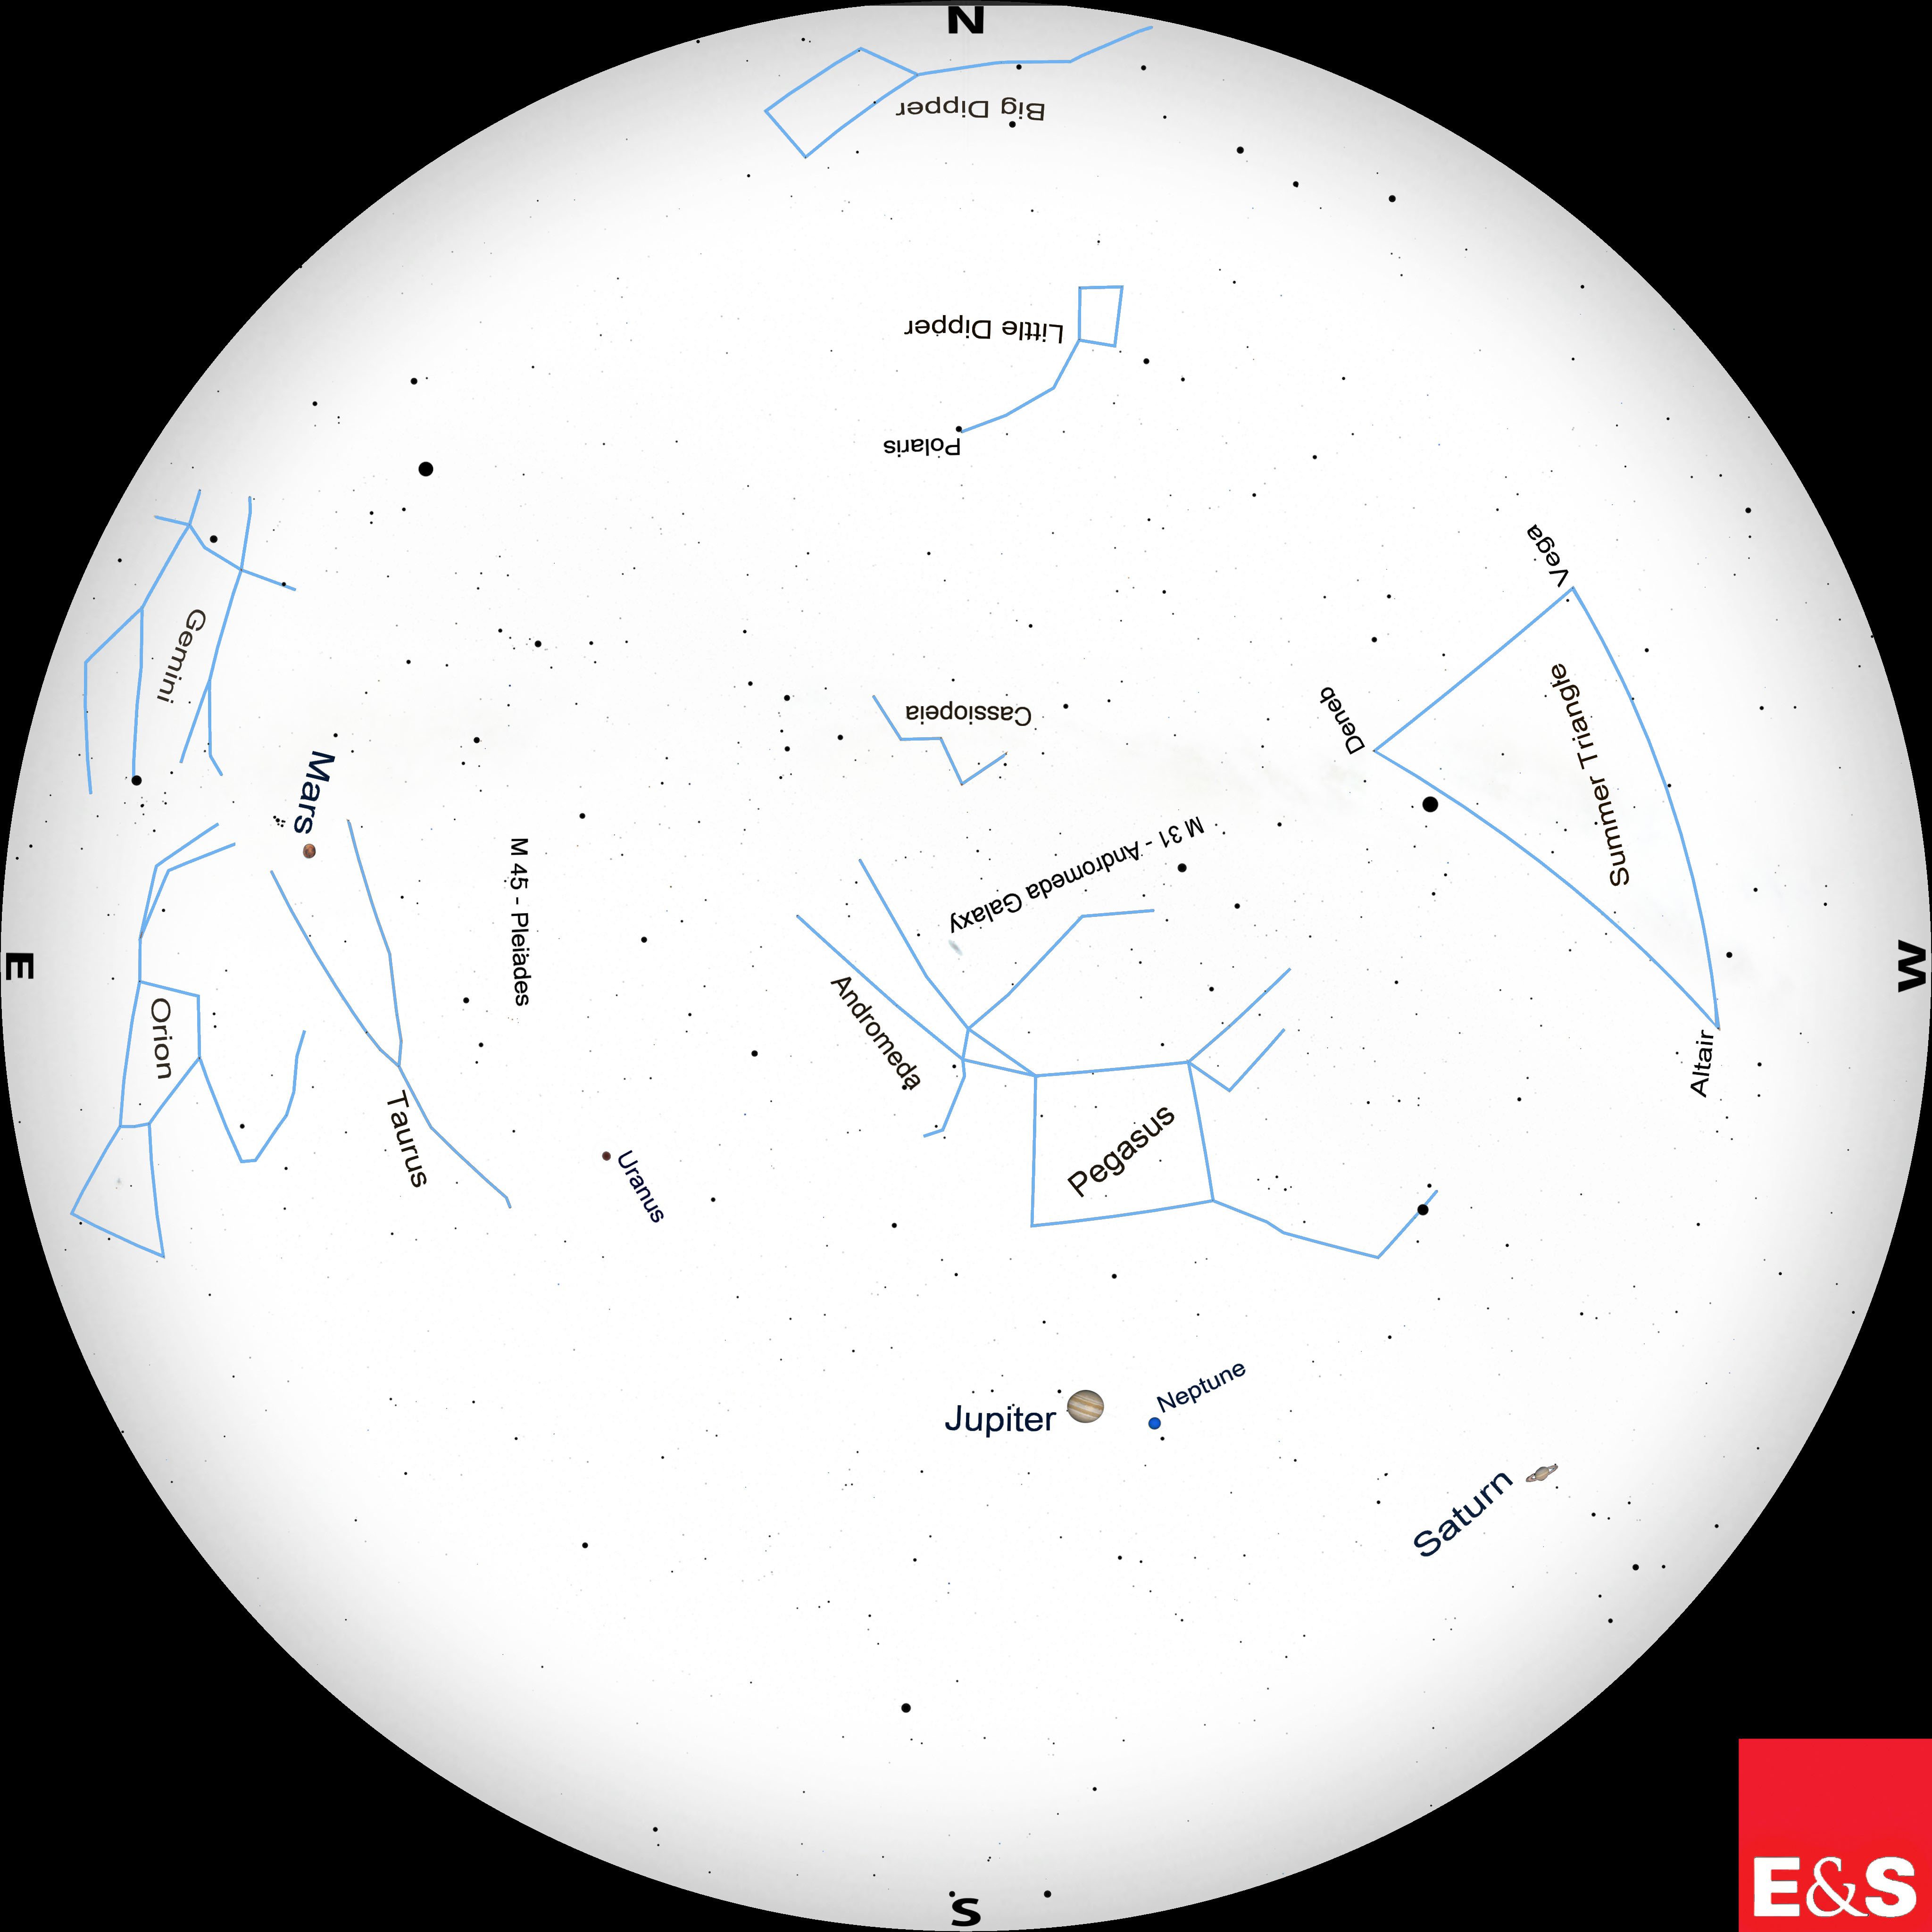 A sky chart showing the locations of the stars and planets in the sky in November.